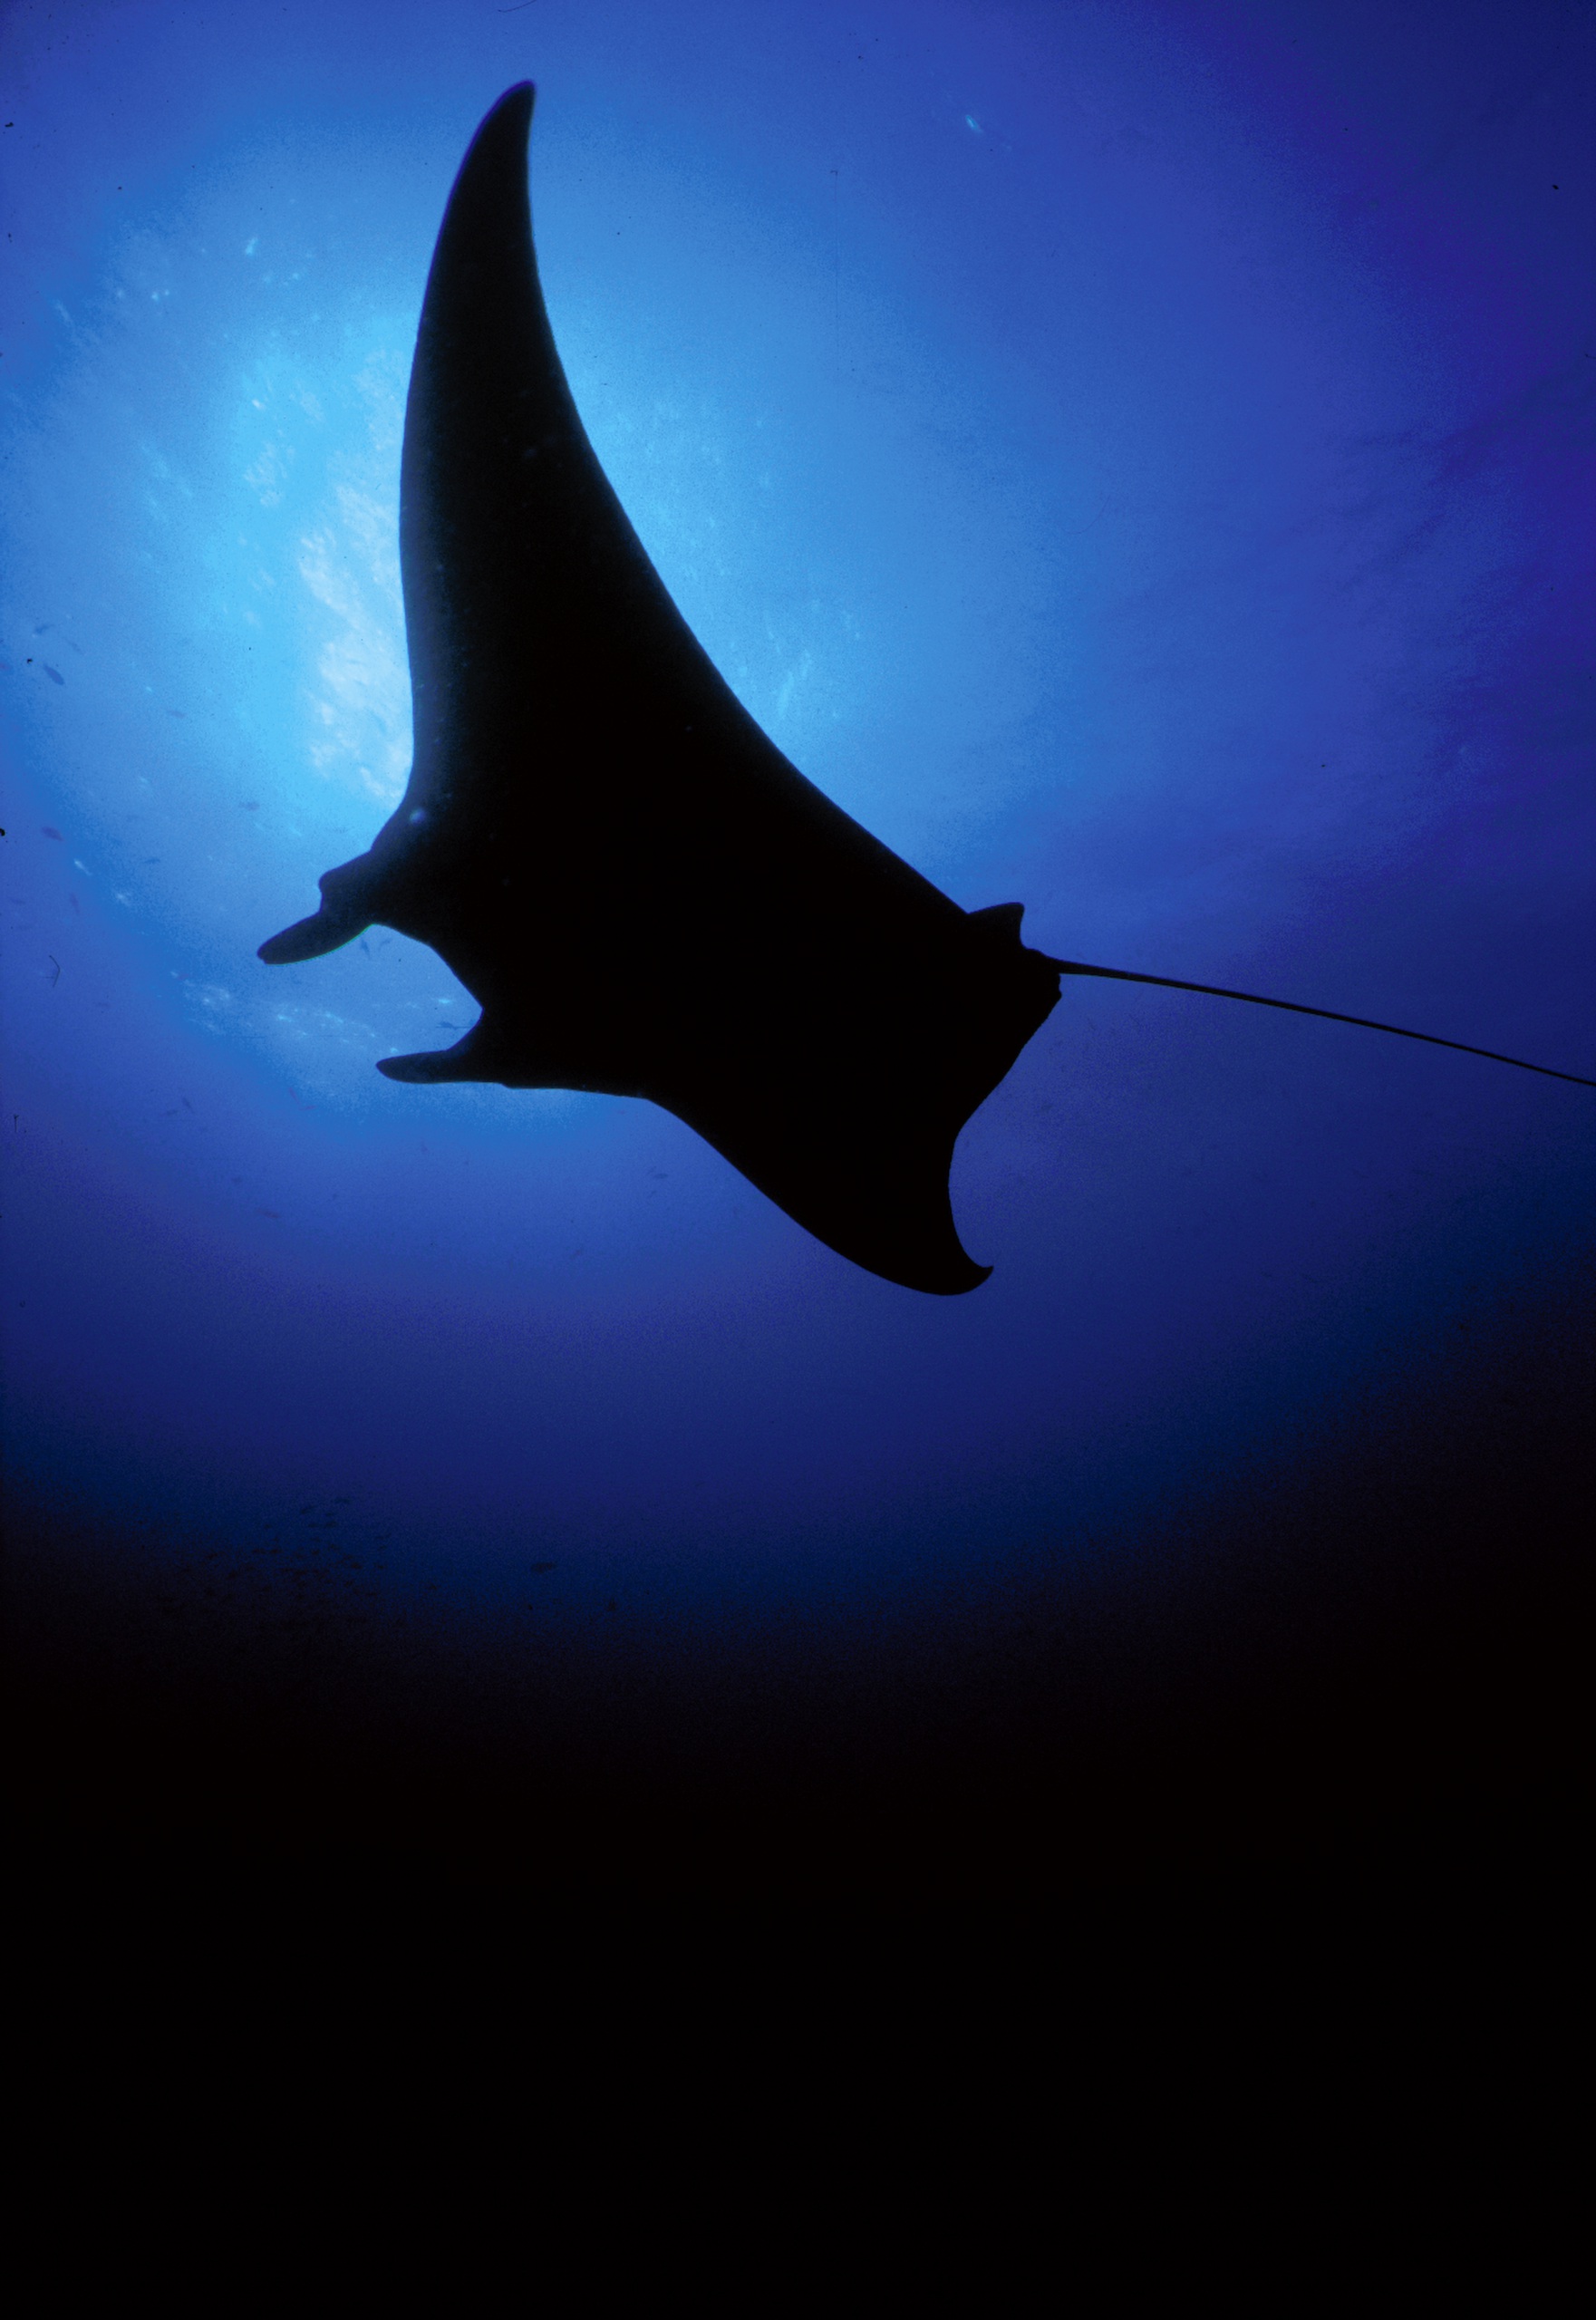 A manta ray shadow from below the waves